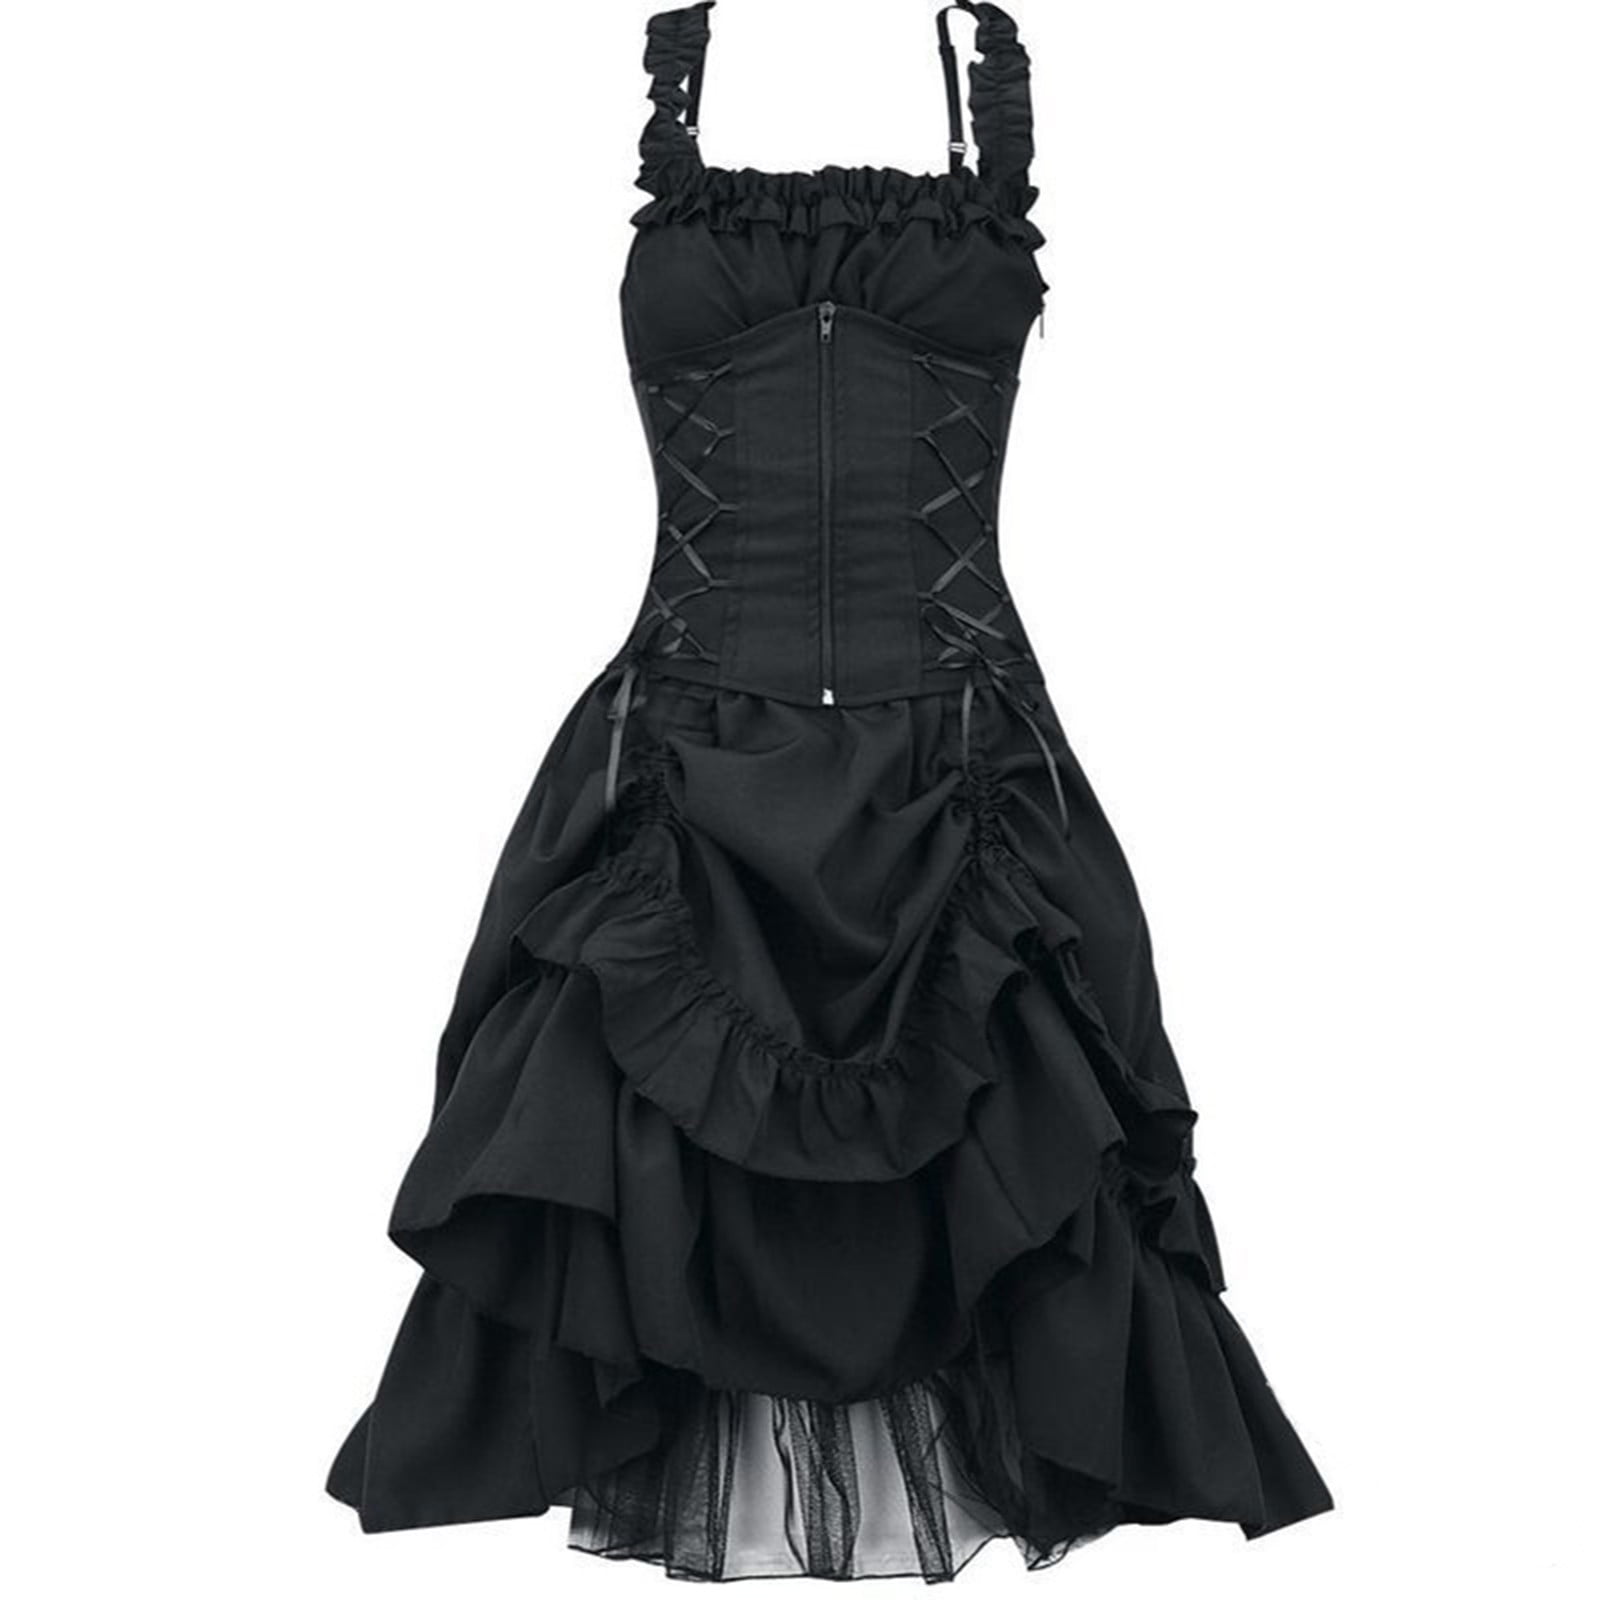 Vintage Goth Dress for Women Ruffle Tiered High Low Hem Party Steampunk ...